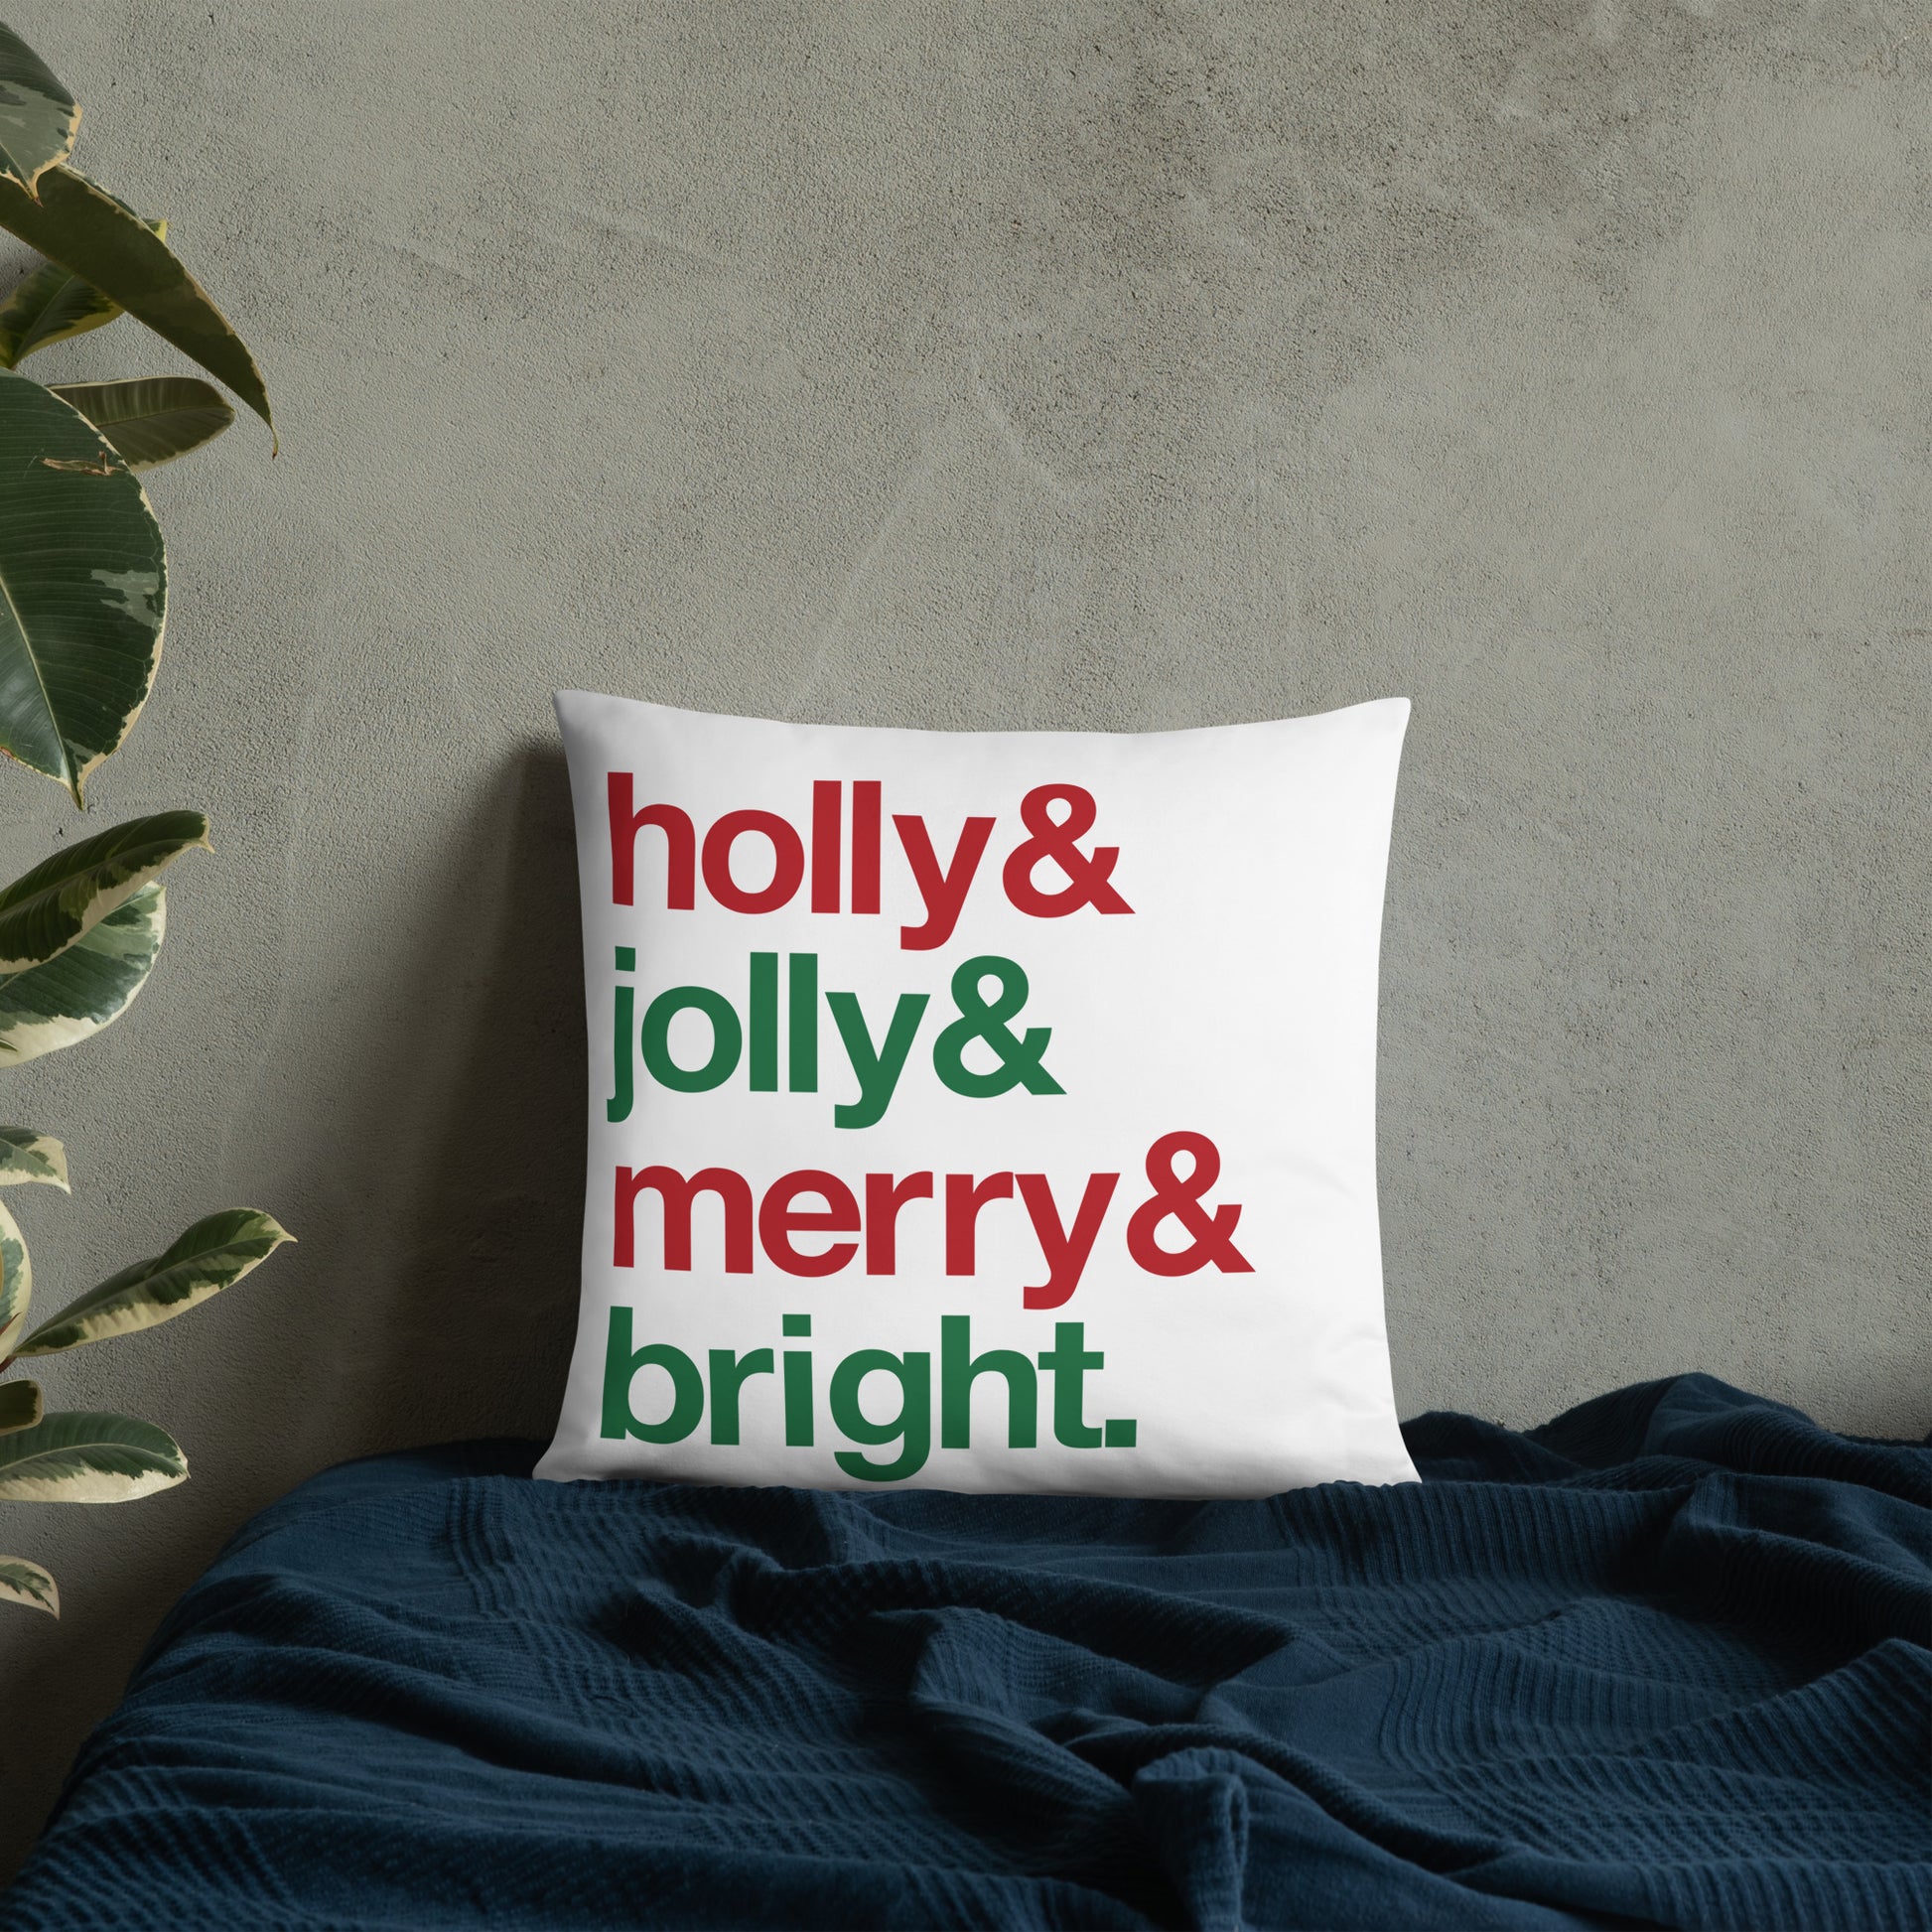 An 18" by 18" throw pillow decorated with four lines of red and green text that read "Holly & jolly & merry & bright". The pillow is  set on top of a bed with a blue blanket against a concrete wall.